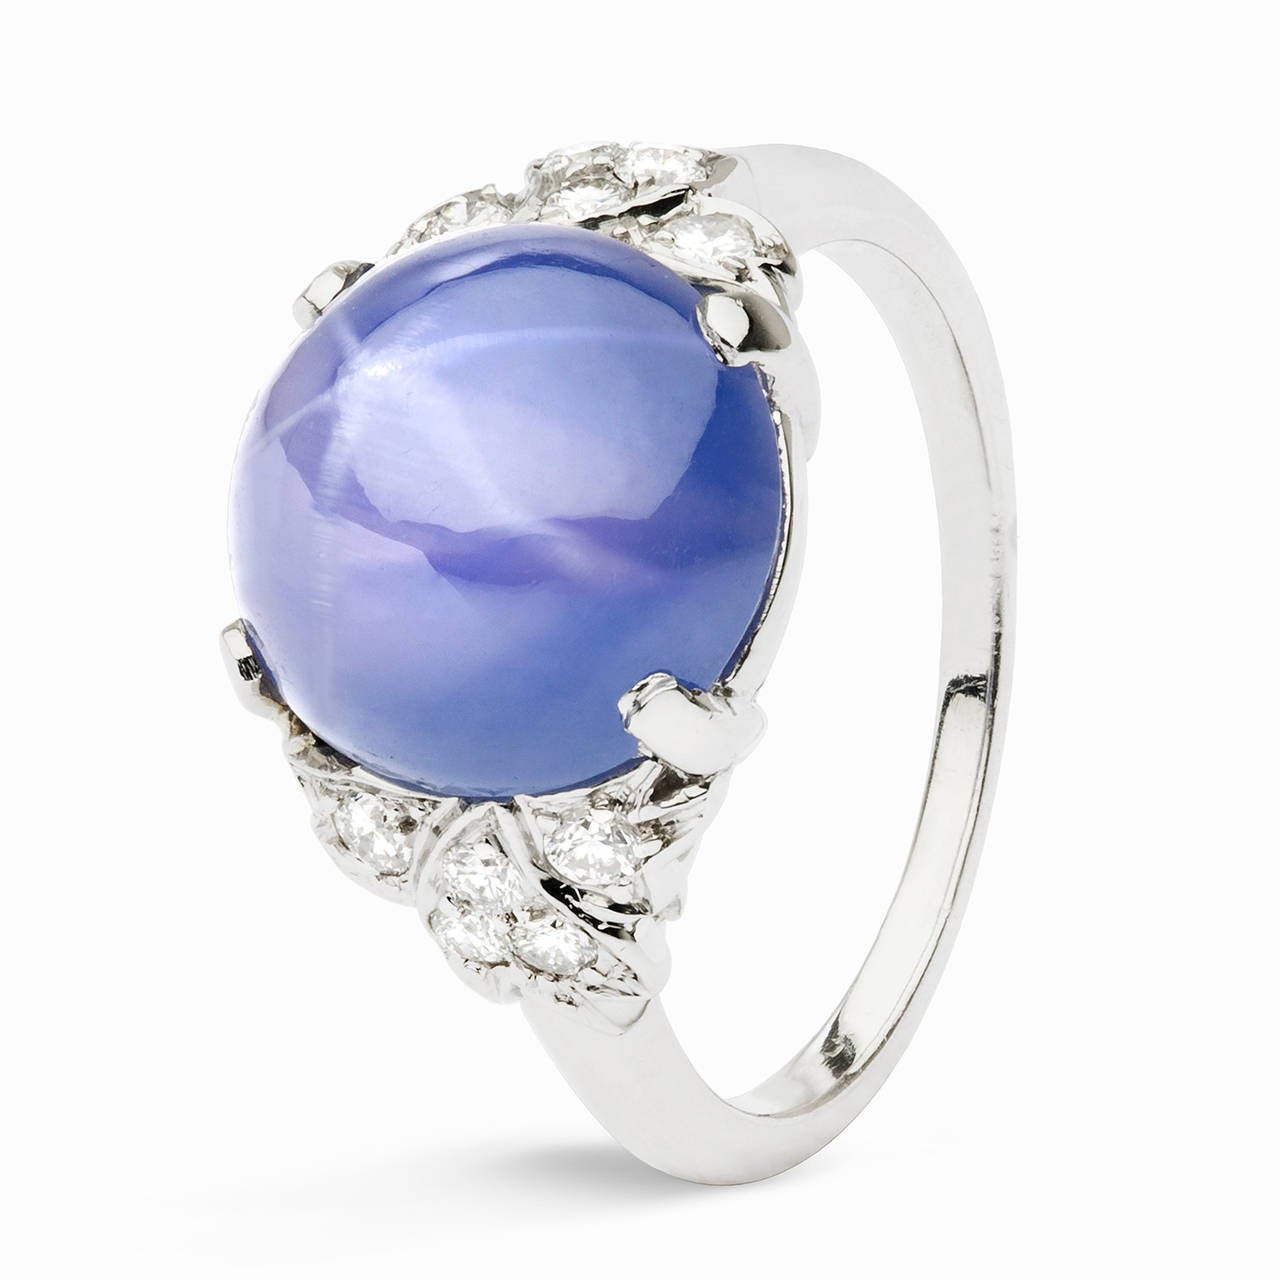 There is a reason why the term “stargazing” was punned and this blue star sapphire is it. “Stargazingly” beautiful, this unique 900 platinum ring features an approximate 10.84 carat star blue sapphire that is perfectly prong set in the center with